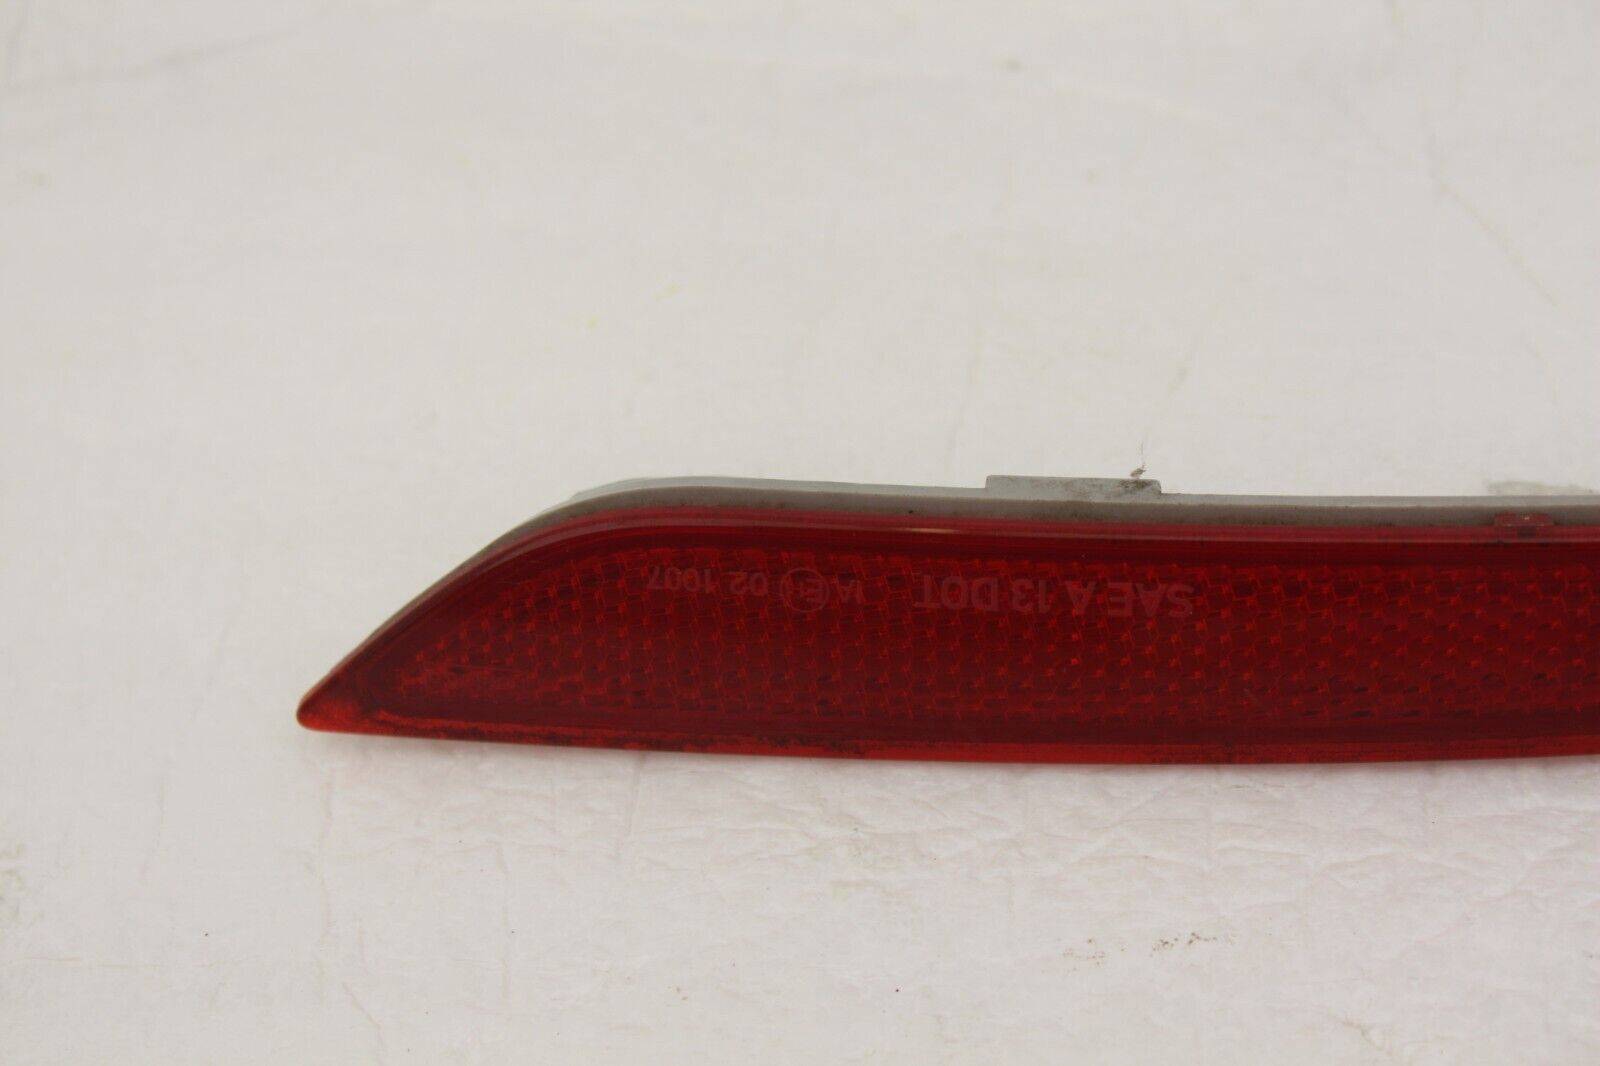 Ford-Mondeo-Rear-Bumper-Left-Side-Reflector-2015-TO-2019-DS73-515C0-B-Genuine-176398797928-4